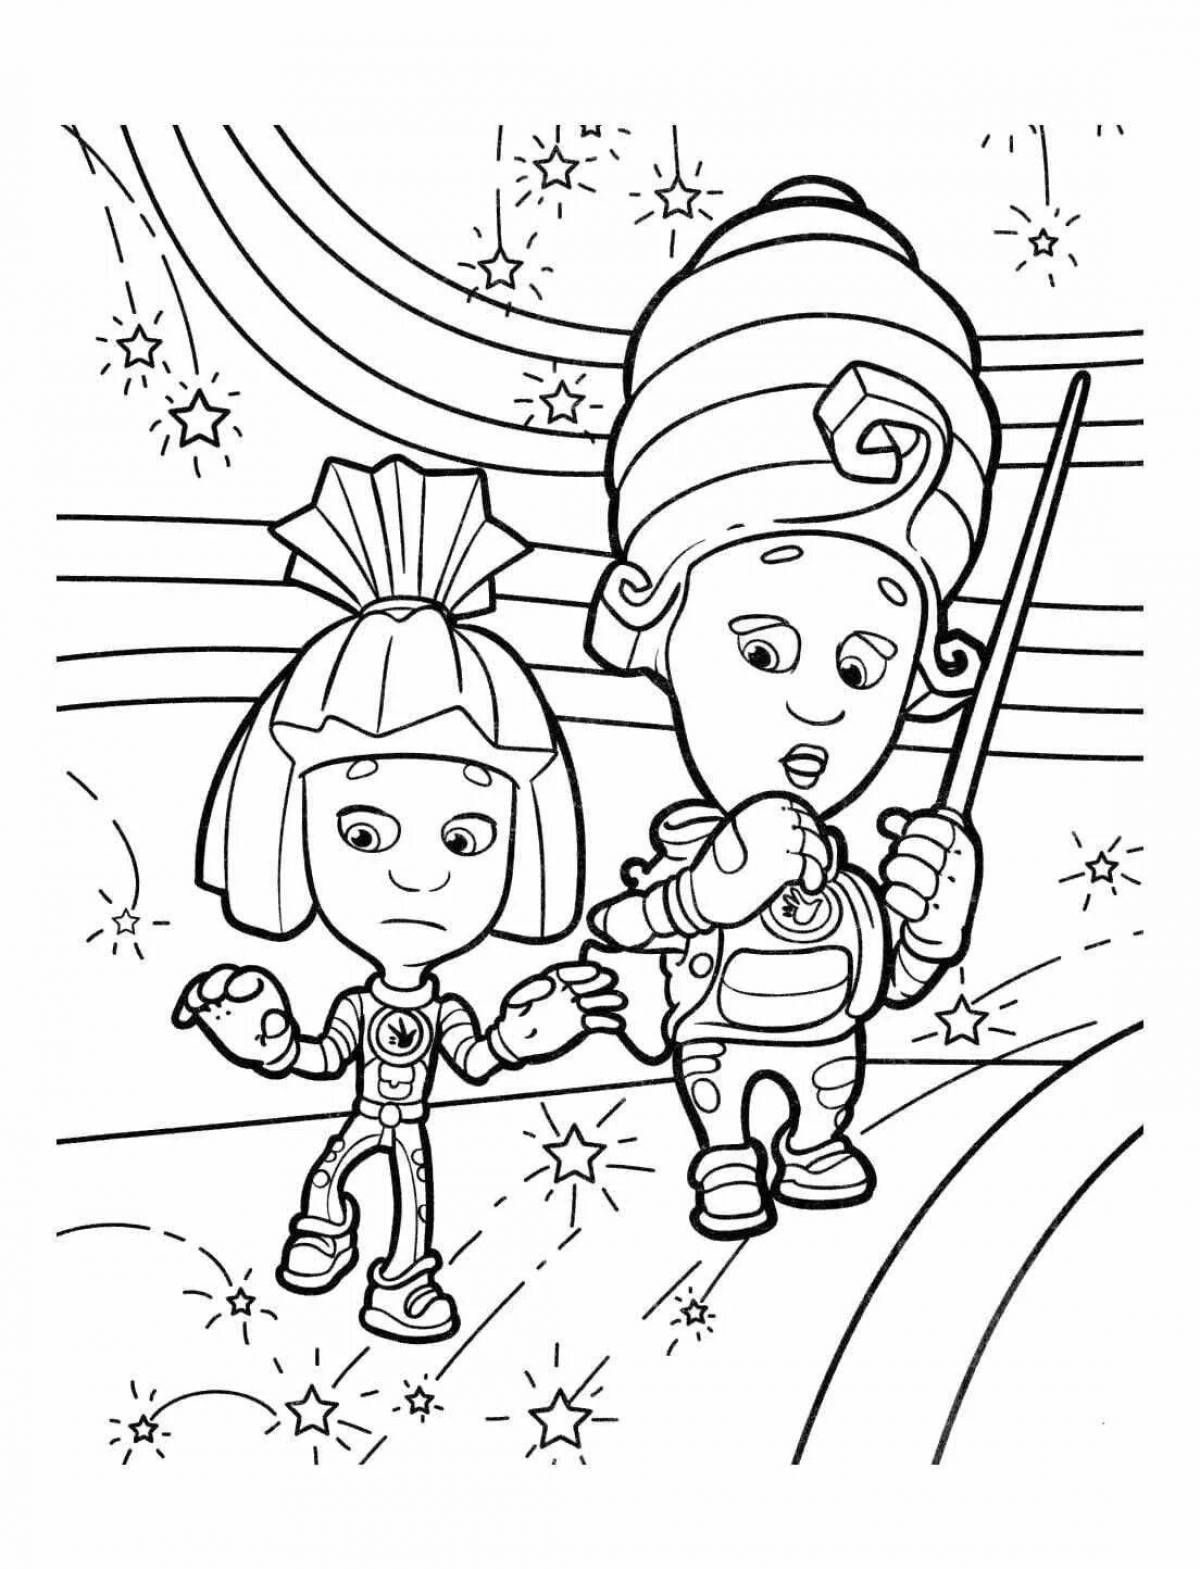 Animated fixies coloring pages for kids